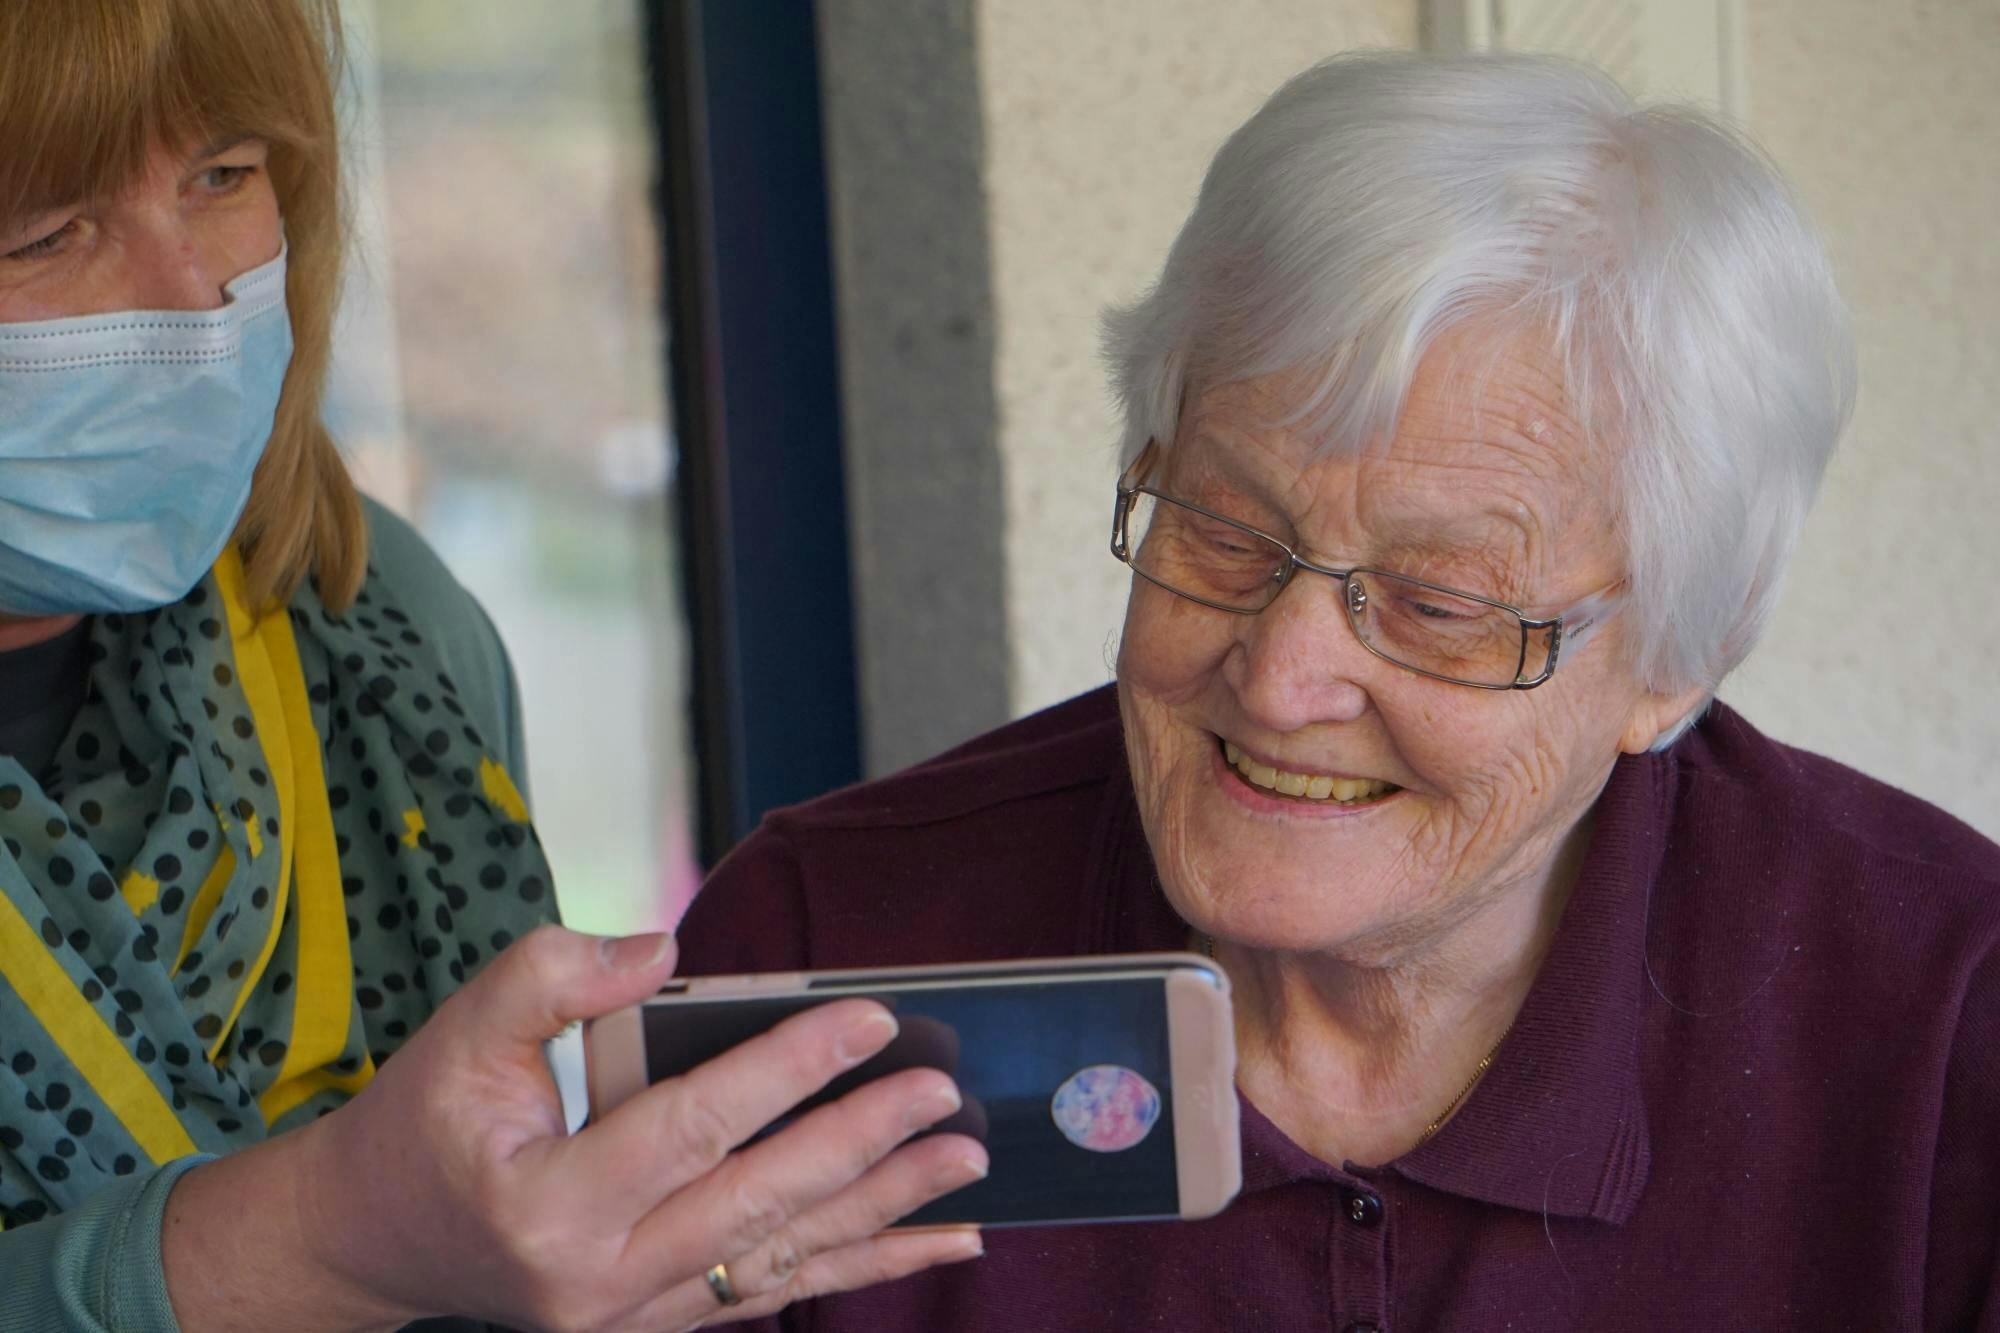 White middle aged woman wearing face mask showing a phone screen to an elderly white woman